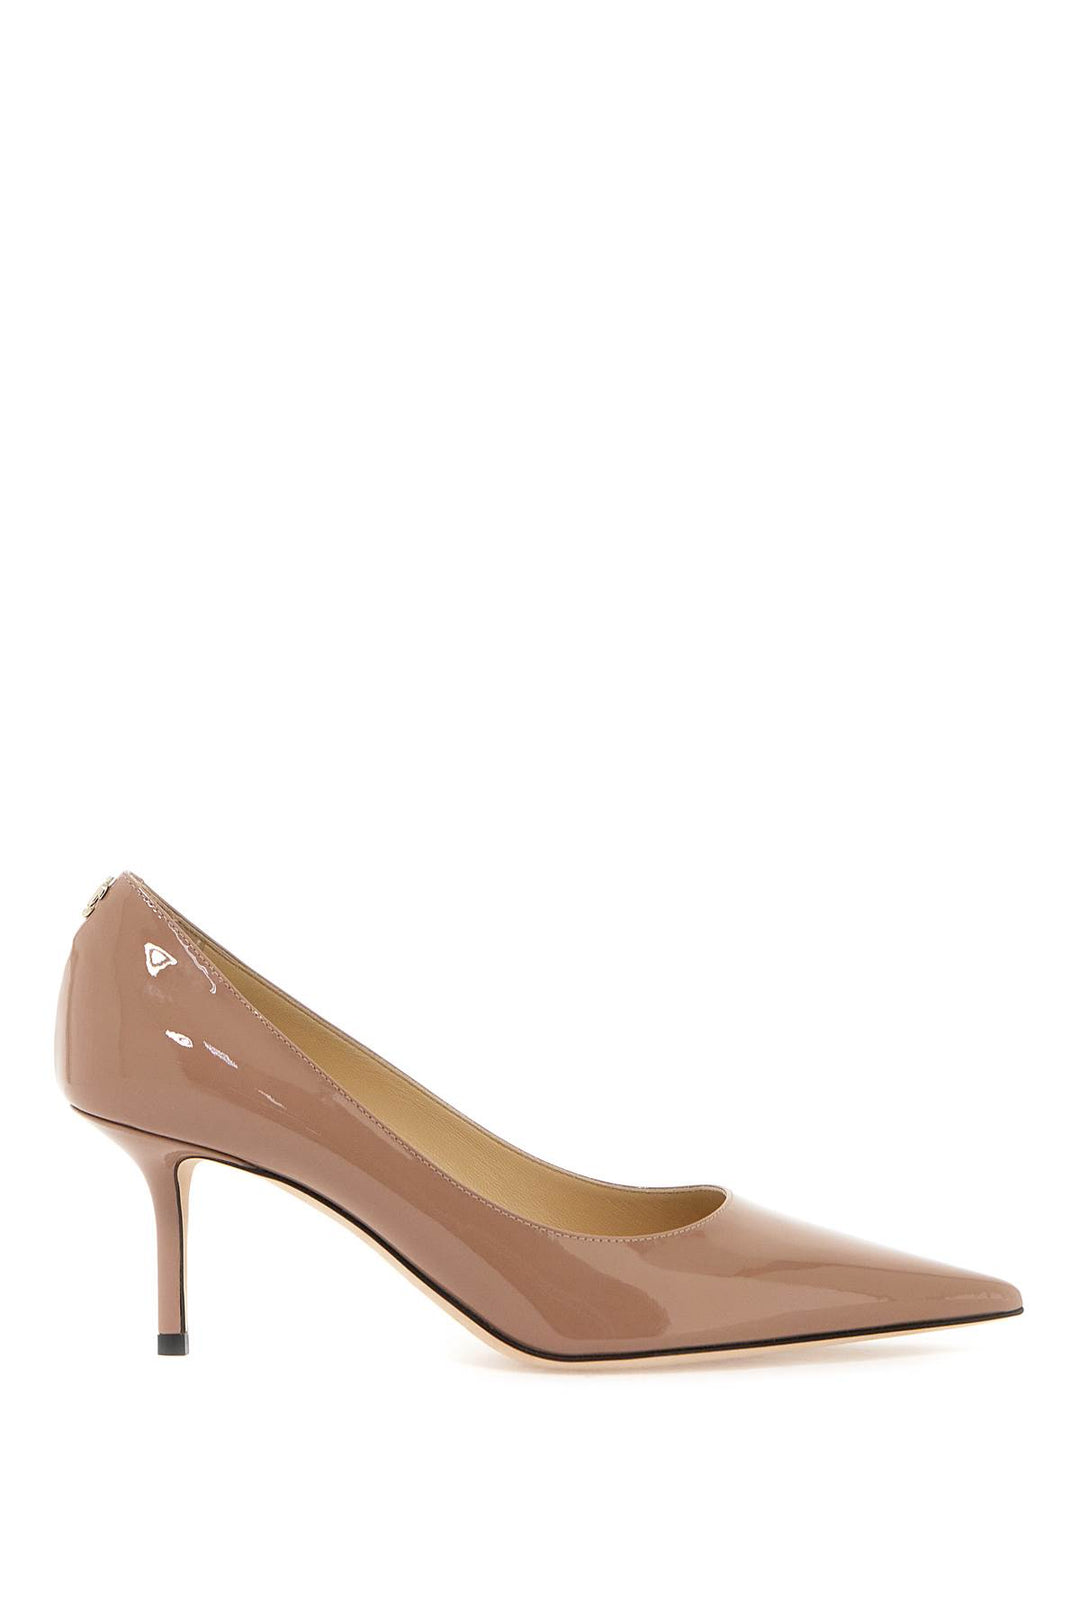 Jimmy Choo Patent Leather Love 65 Pumps   Neutral